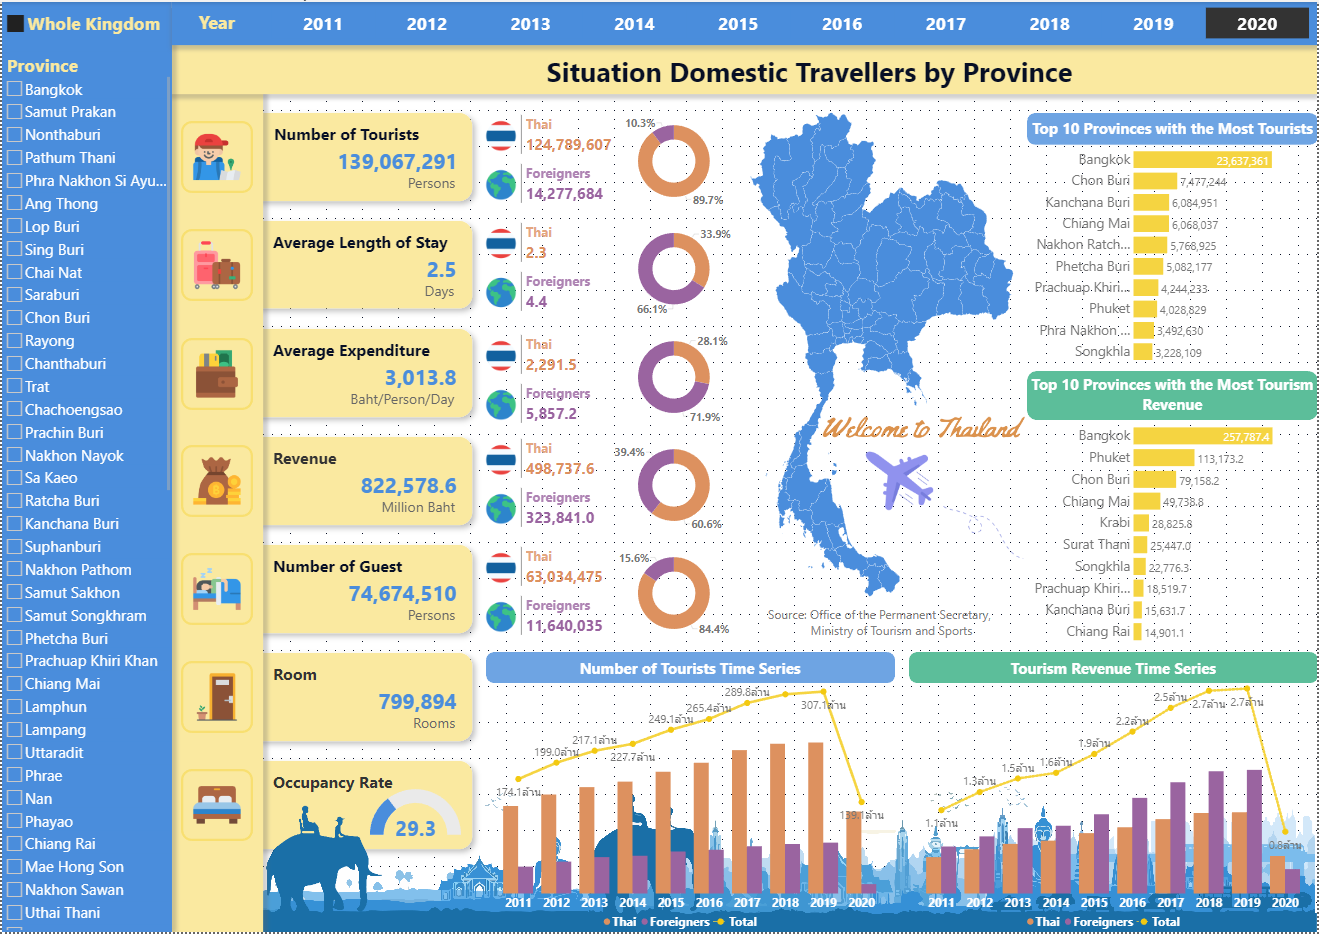 SITUATION DOMESTIC TRAVELLERS BY PROVINCE